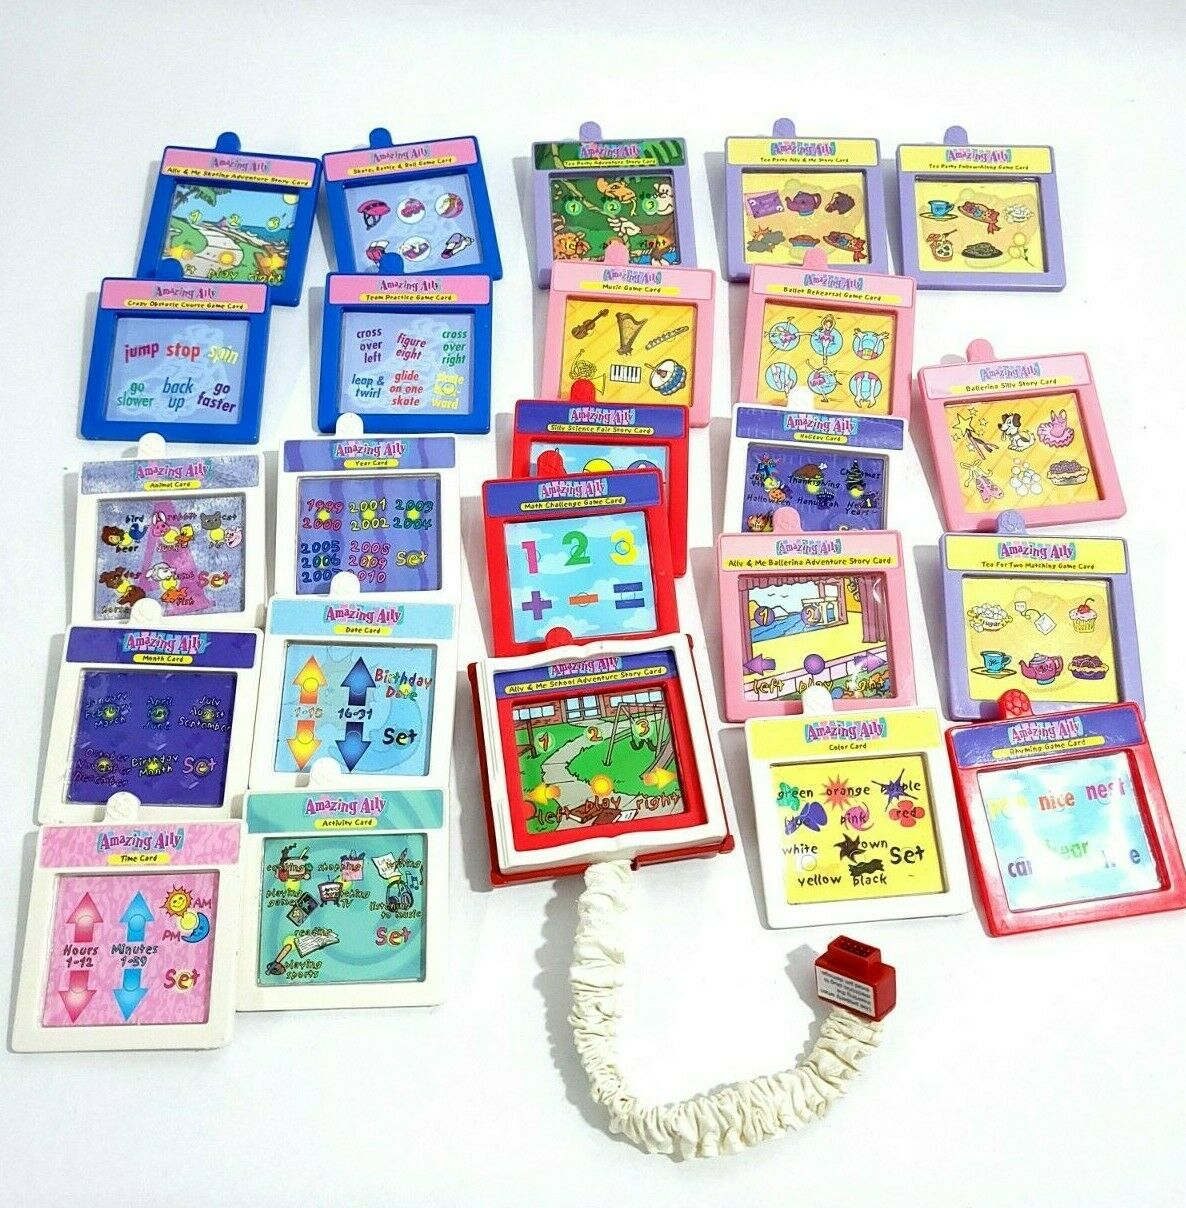 Amazing Ally Accessory School Activity Cartridges 1999 Interactive Not Tested